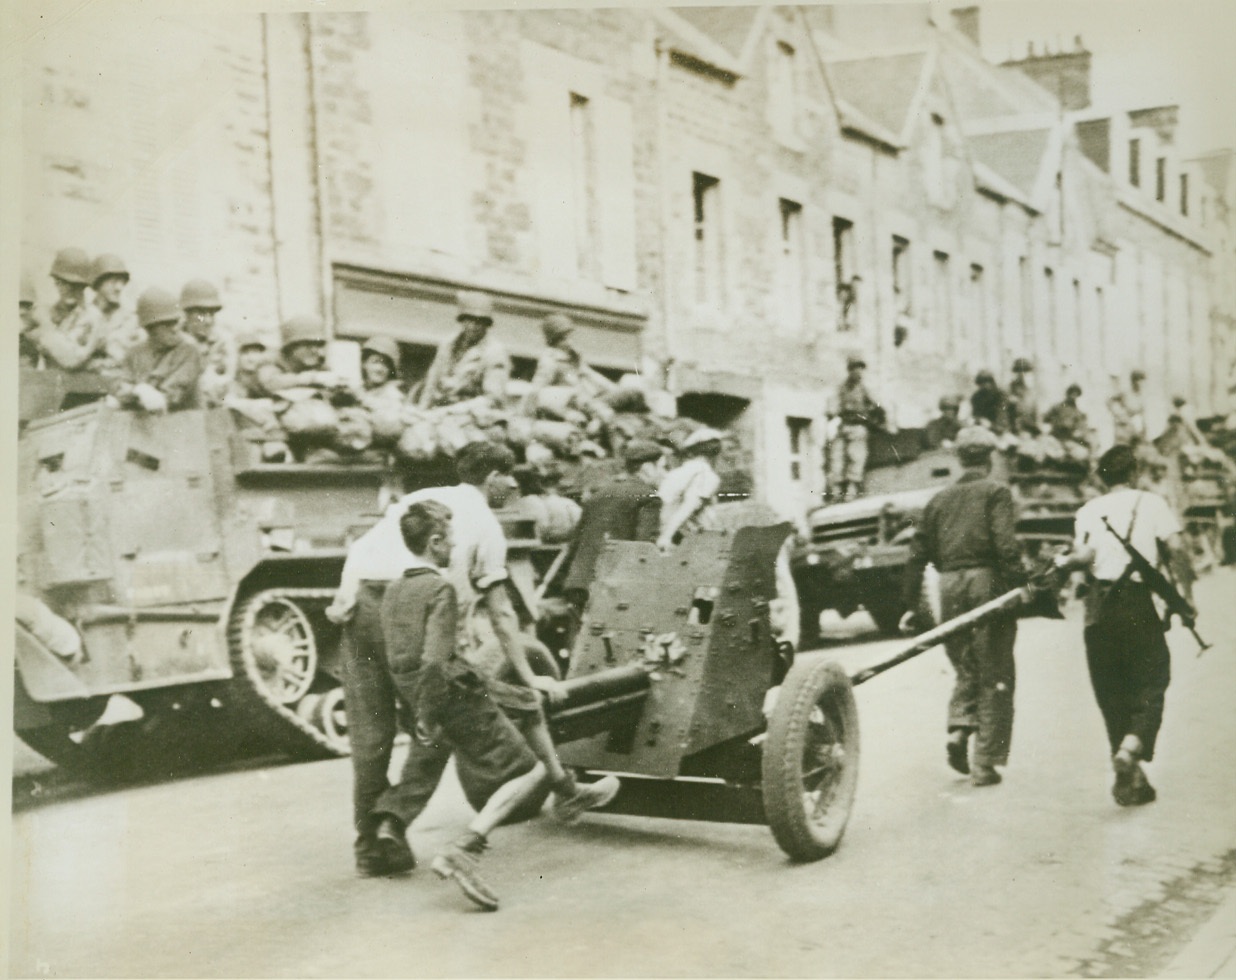 Frenchmen Retrieve German Gun, 8/4/1944. France—As American and Allied forces watch from trucks at the side of the road, civilians of Brehal, France, bring in German equipment left behind by the rapidly retreating Nazis. Little boy rides the barrel of a light infantry cannon being rolled through the town. Credit: Signal Corps radiotelephoto from ACME;